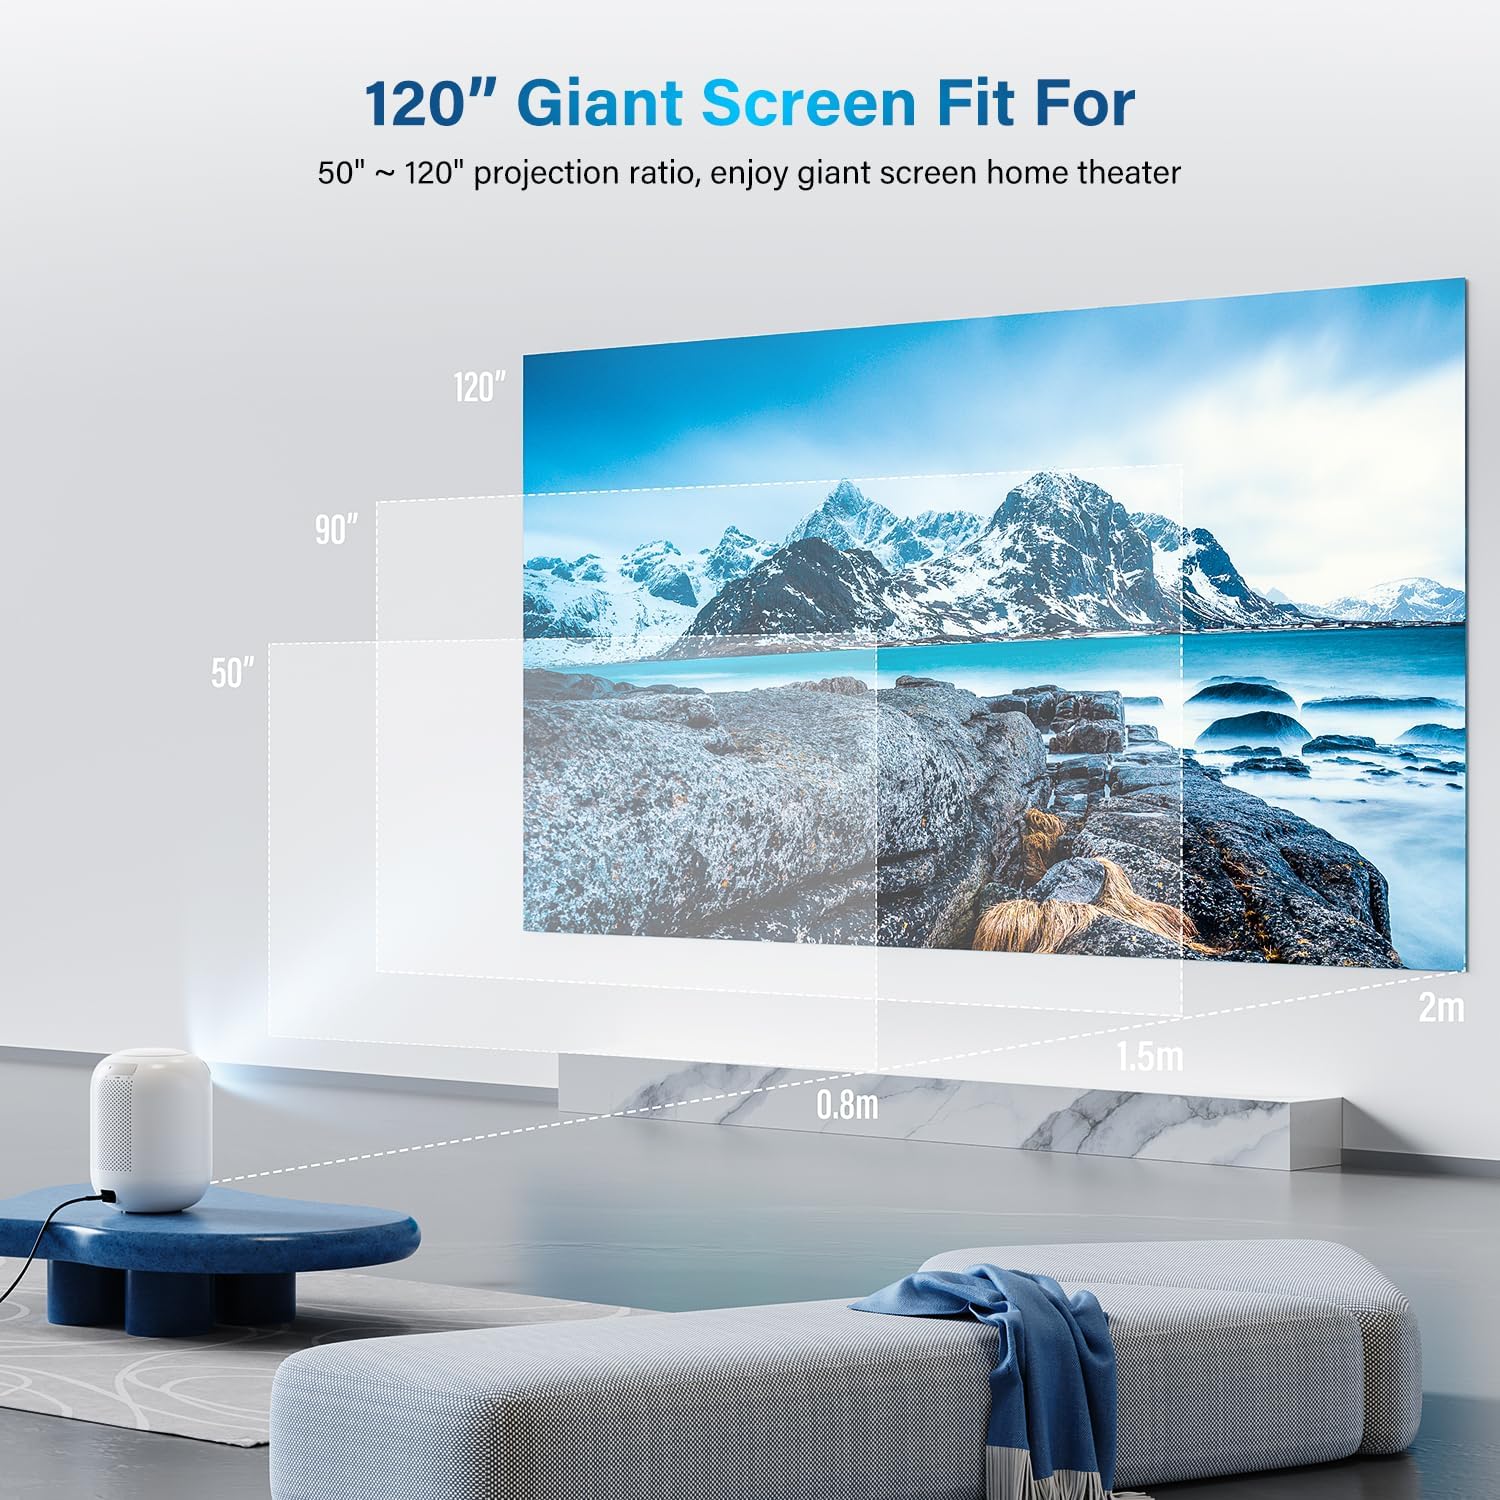 L010 Android 11.0 1080p smart projector auto focus auto keystone bluetooth 5.0 wifi 6 Full HD home theater video Beamer - Magcubic Projectors